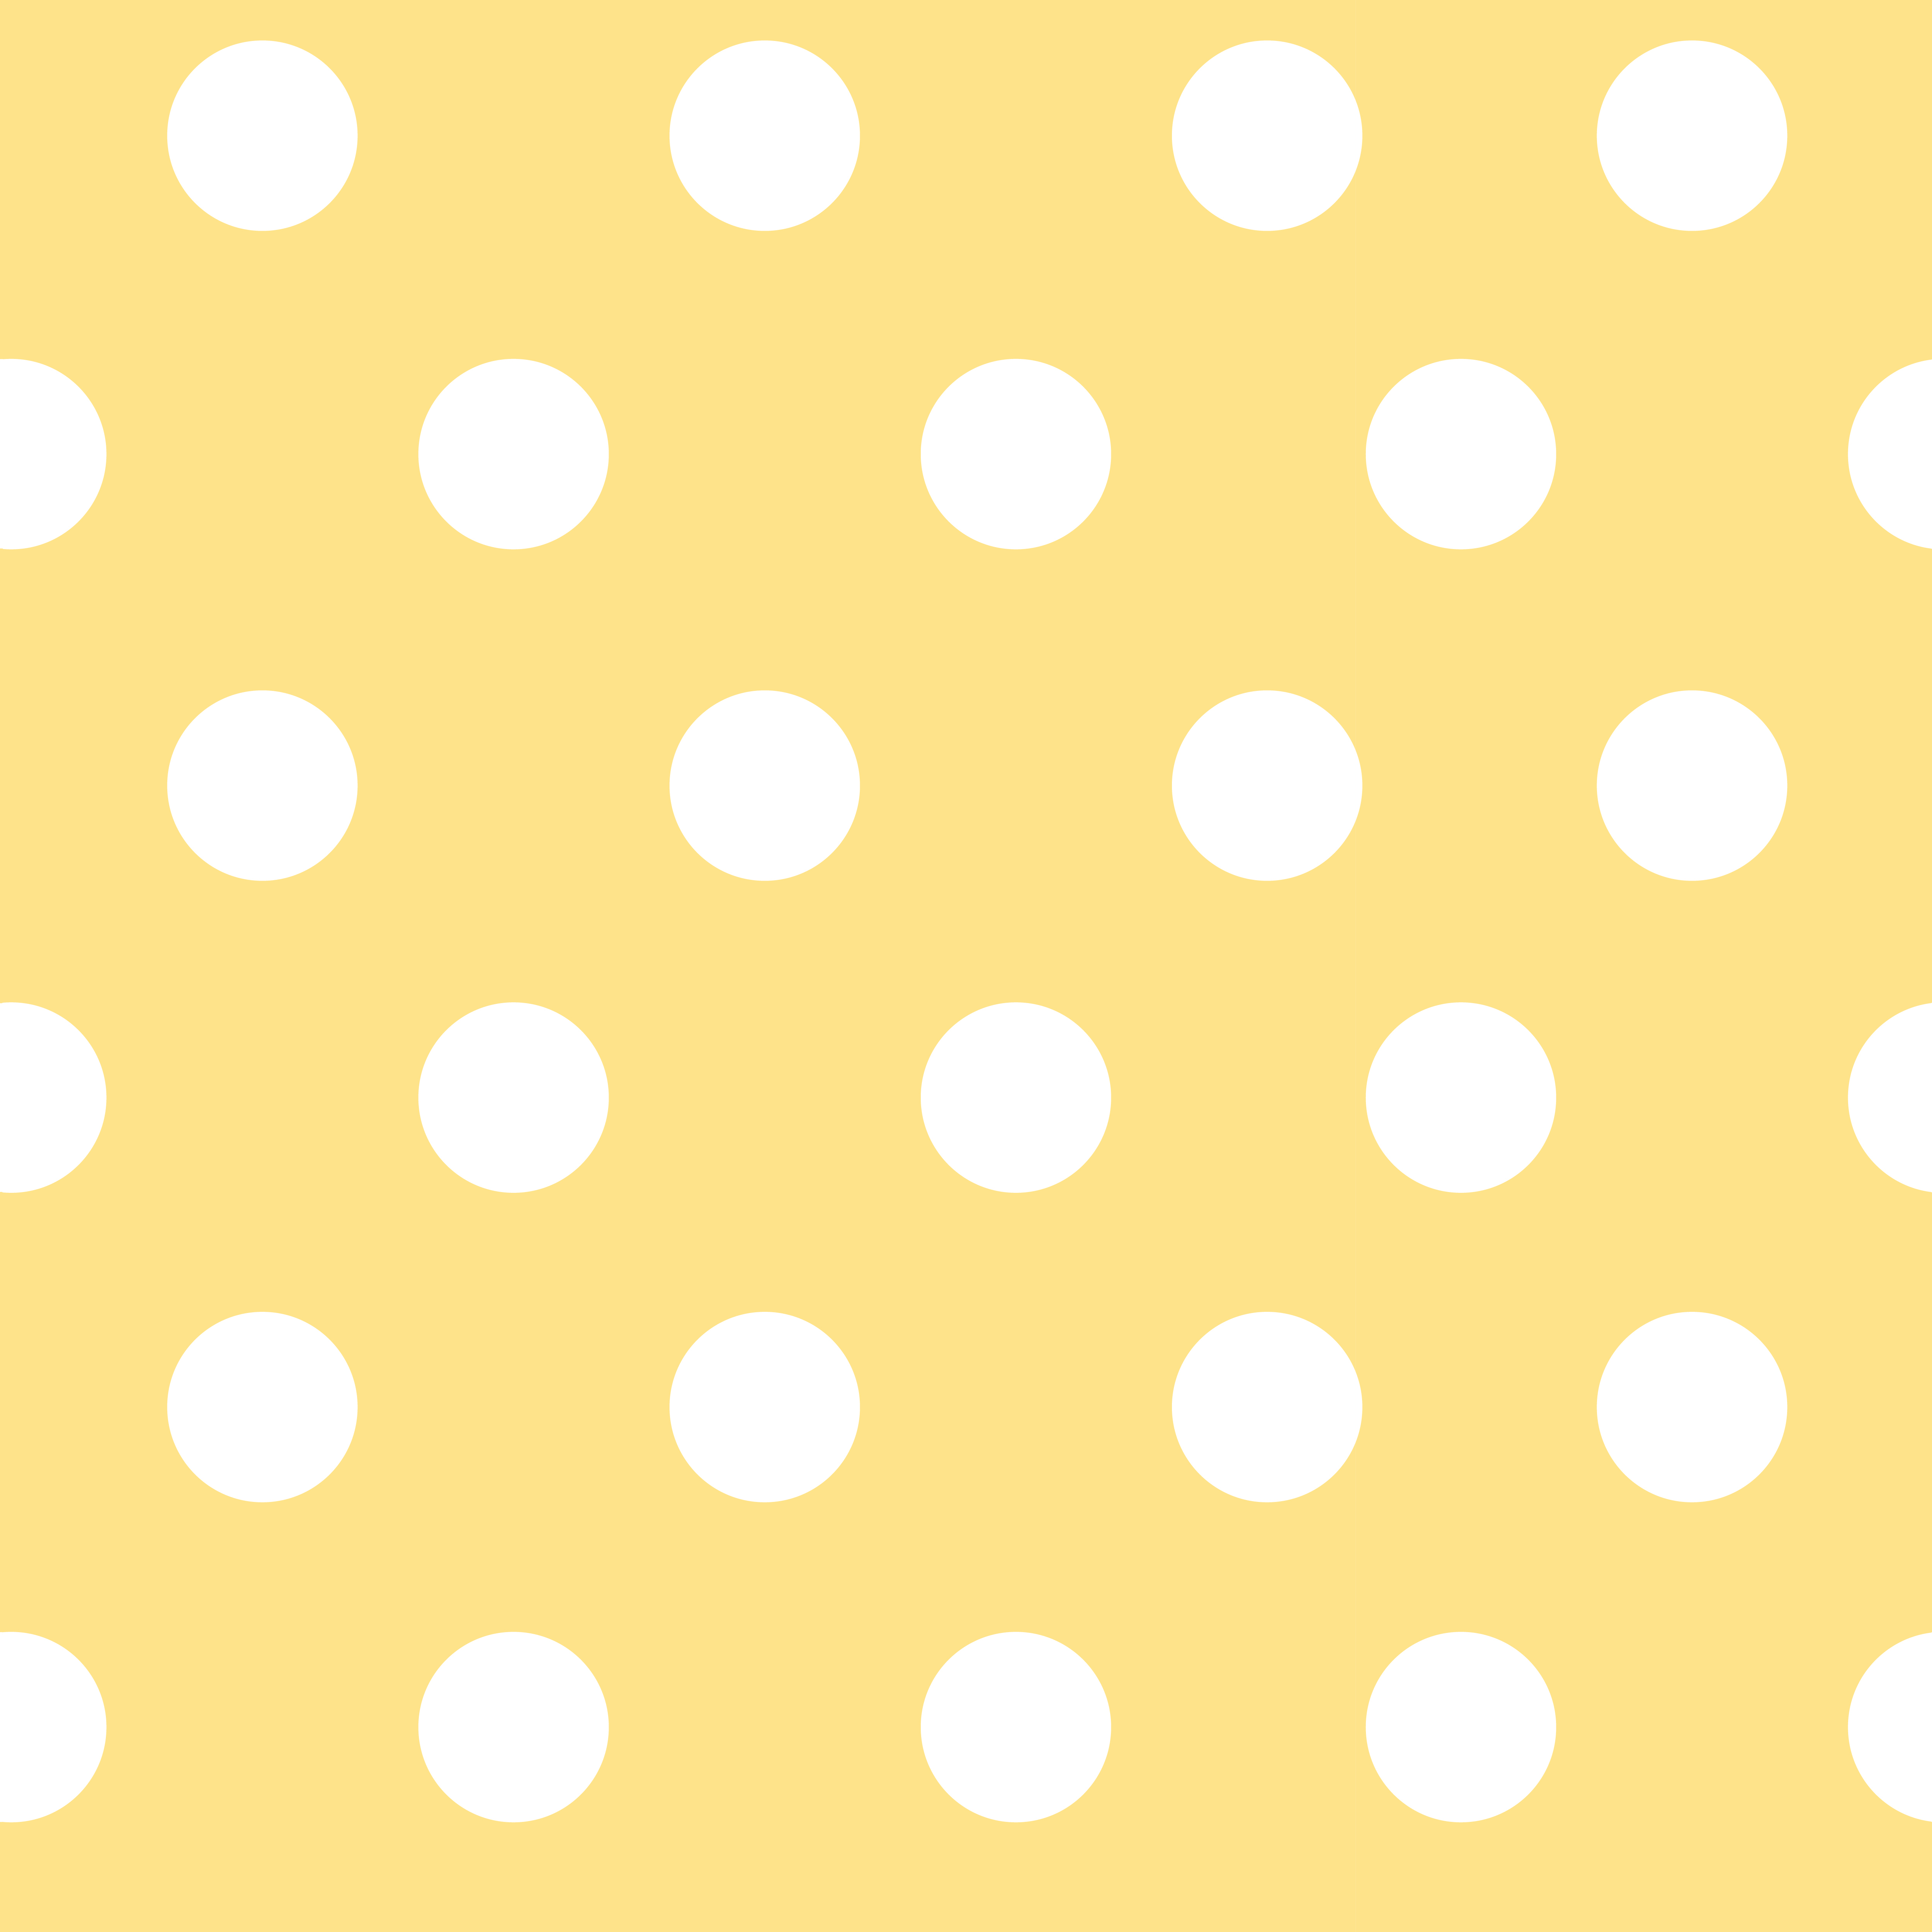 Yellow and white seamless polka dot pattern vector - Download Free ...